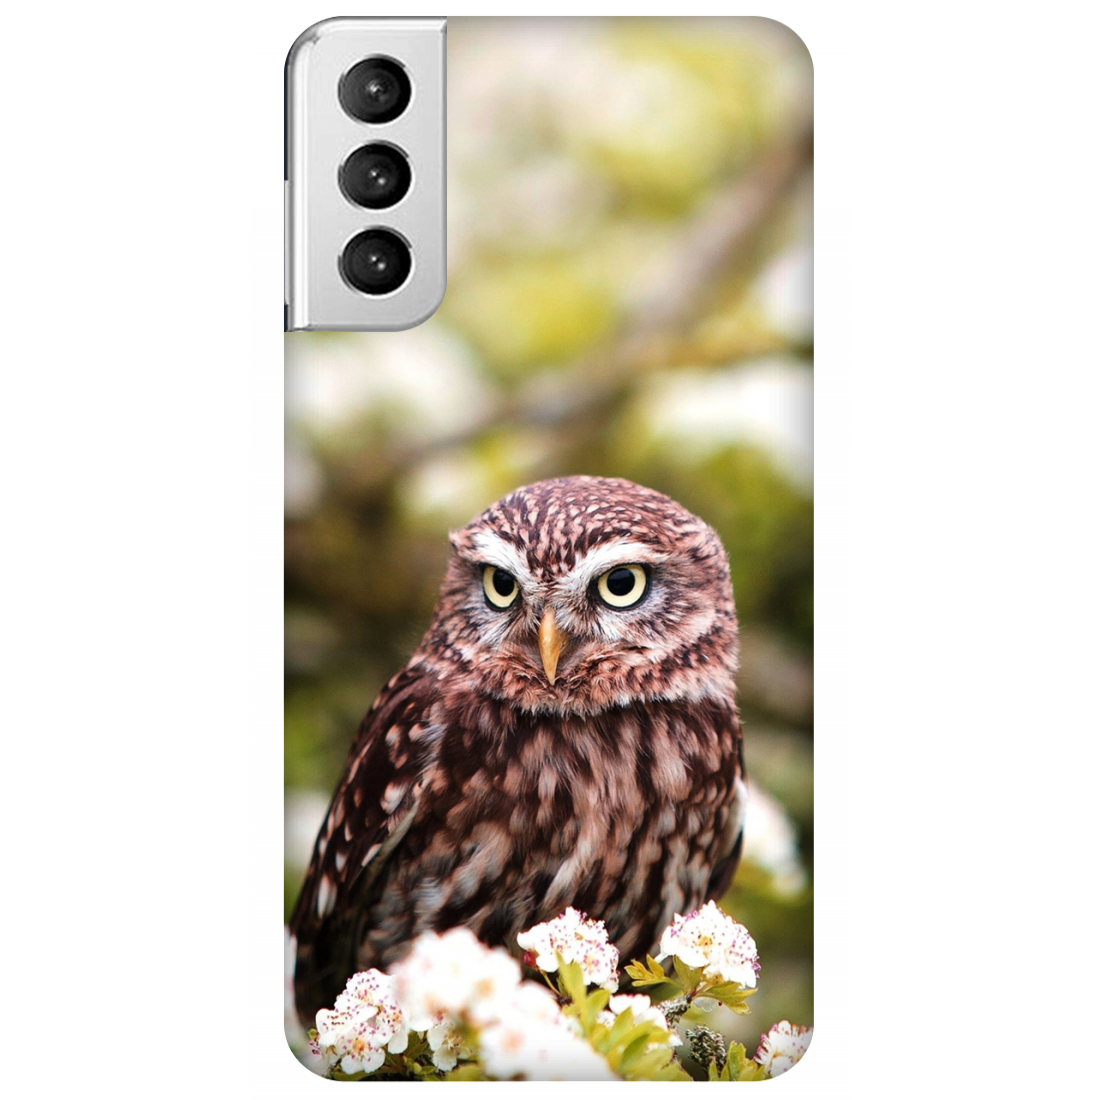 Owl Amidst Blossoms Case Samsung Galaxy S21 Plus 5G